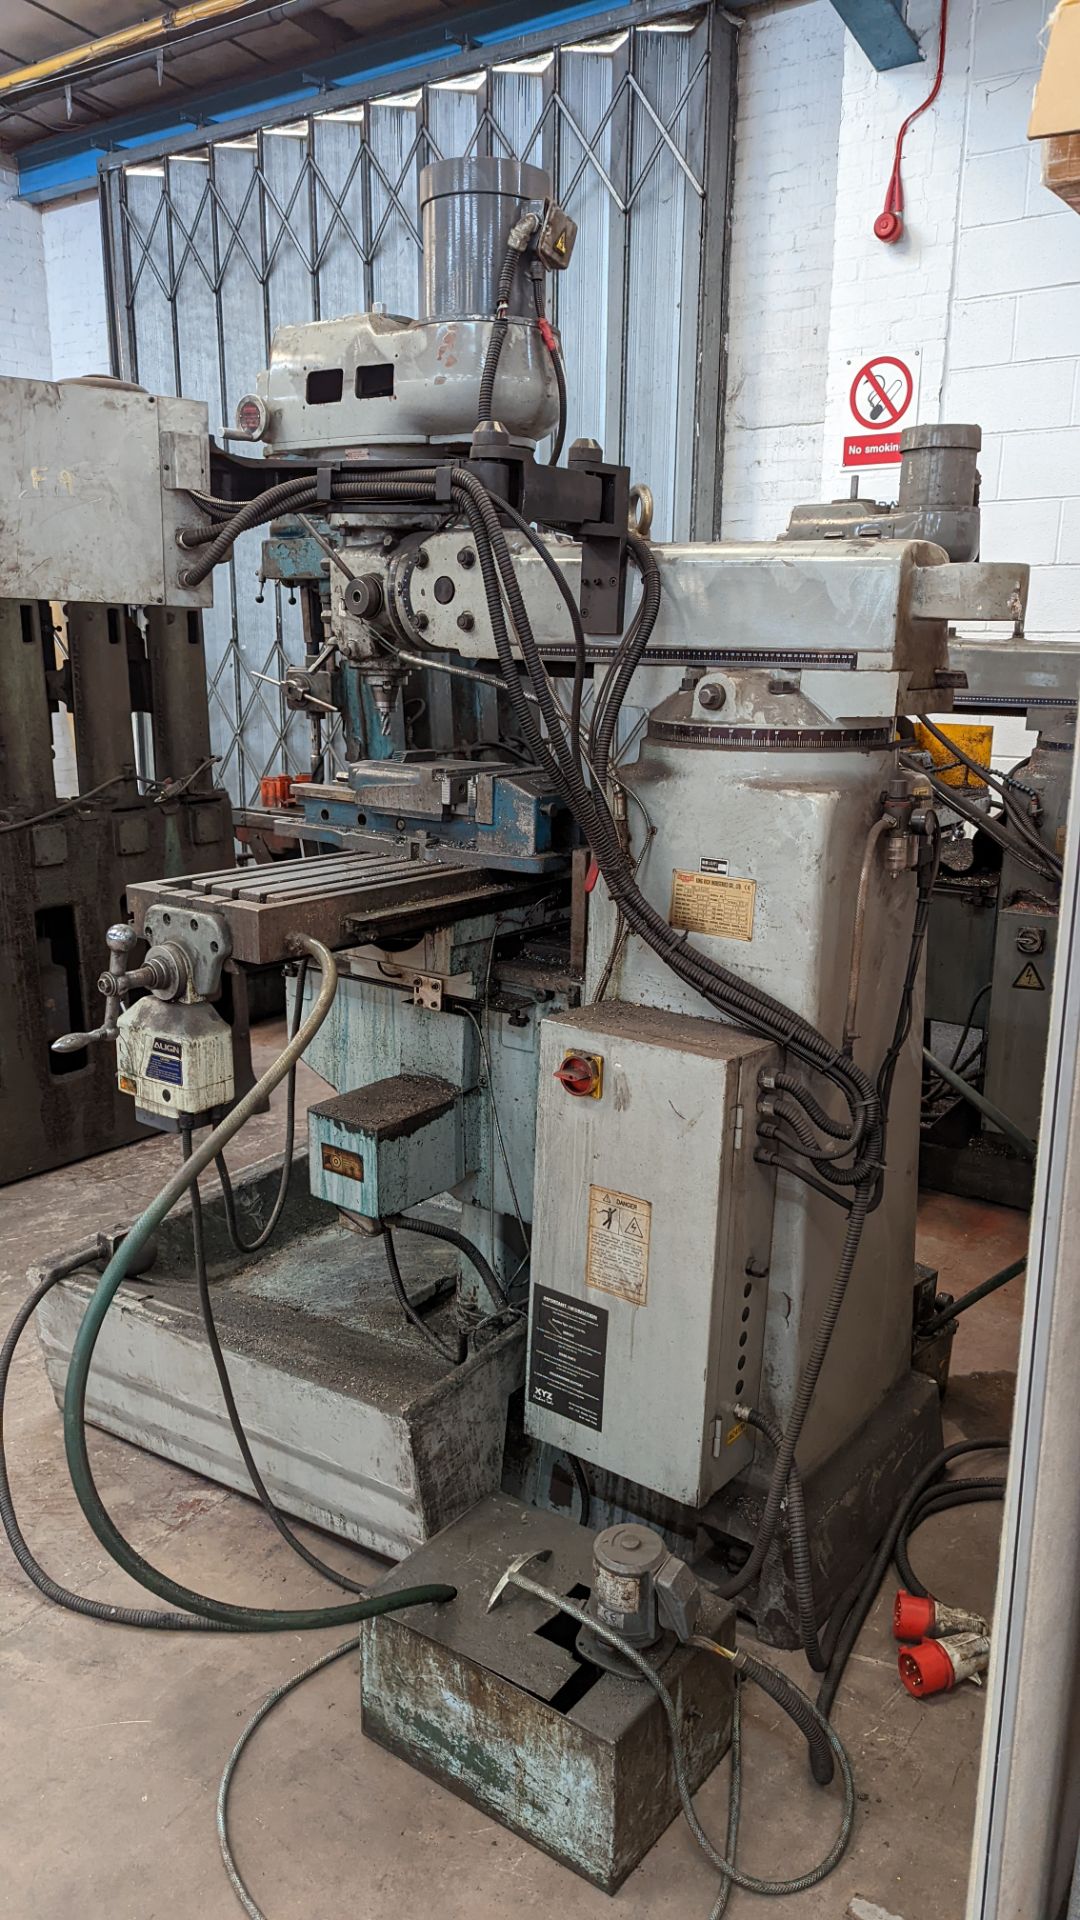 XYZ 3000 KR-V3000 turret mill with Newell DRO & Align CE-500S power feed - Image 16 of 16